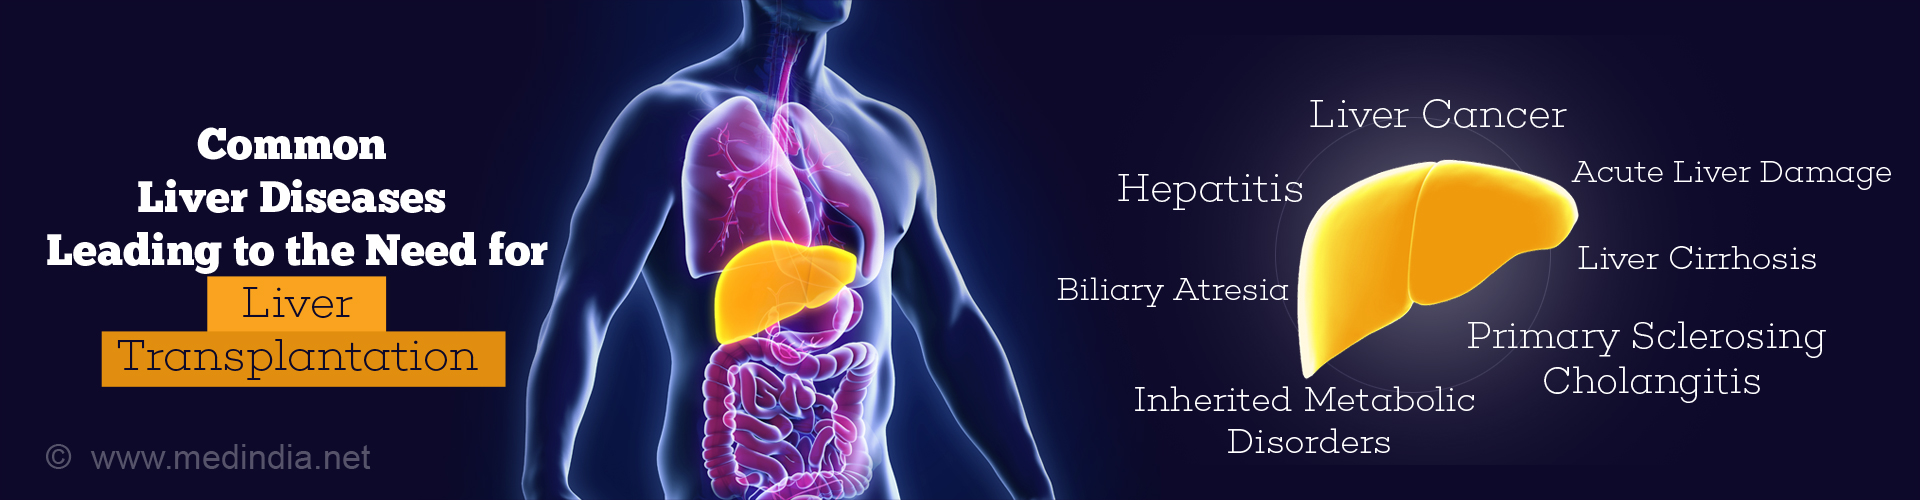 Common Types of Liver Diseases Leading To The Need for Liver Transplantation
- Liver cancer
- Hepatitis
- Biliary Atresia
- Inherited Metabolic Disorders
- Acute Liver Damage
- Liver Cirrhosis
- Primary Sclerosing Cholangitis